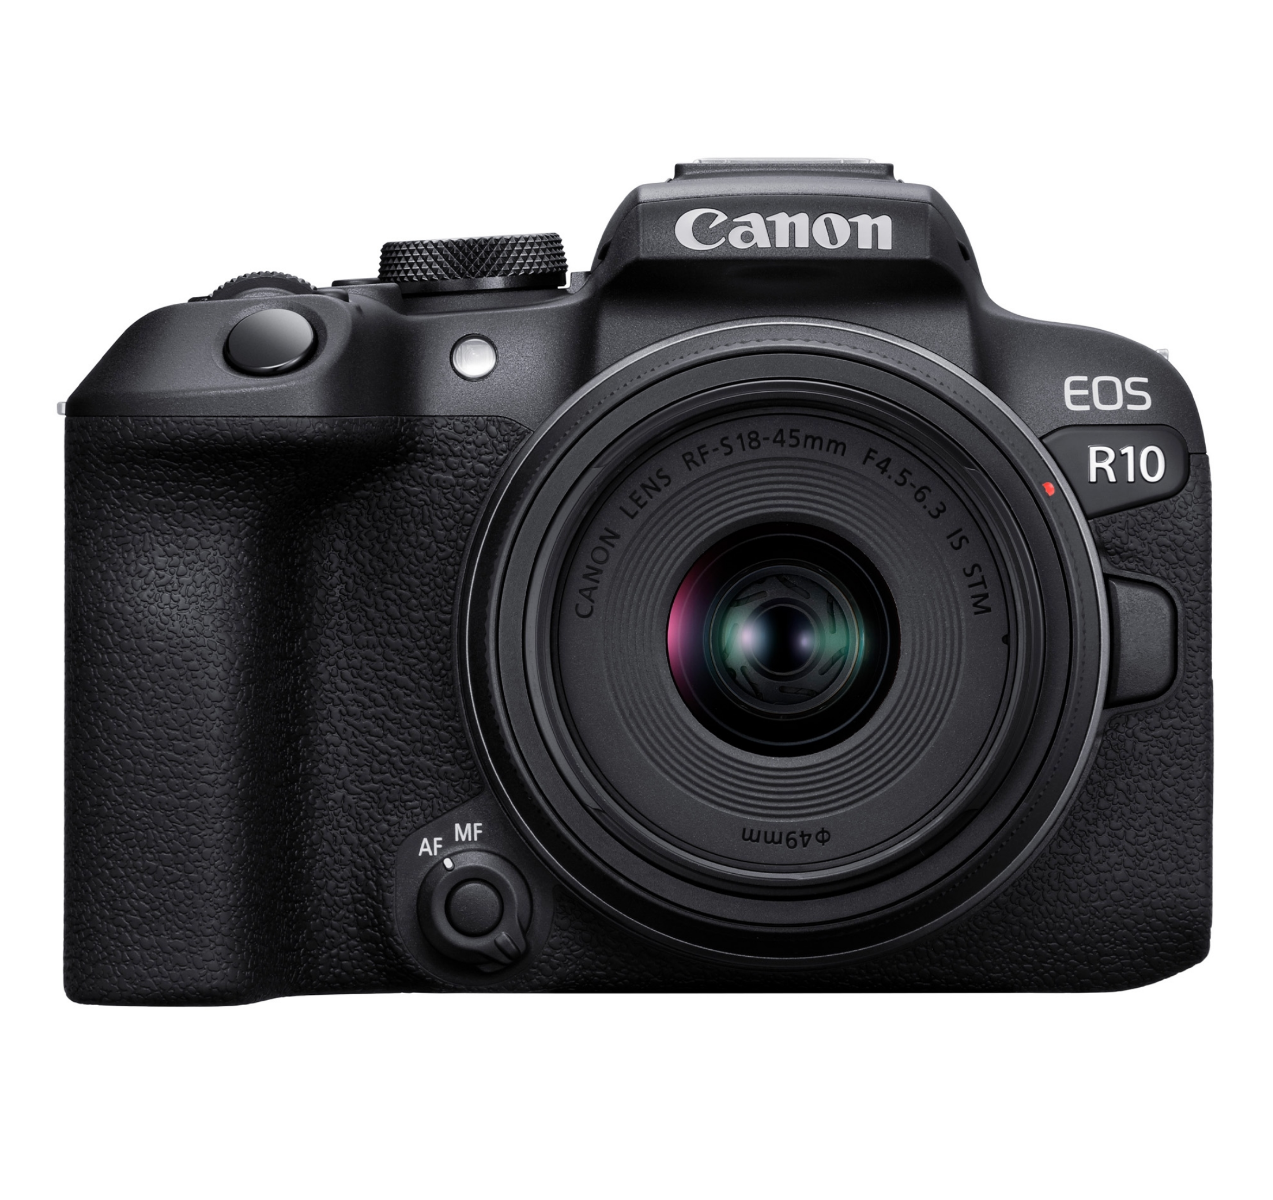 Canon EOS R10 Mirrorless Camera + RF-S 18-45mm lens Kit - Product photo 1 - Front view of the camera with the lens attached